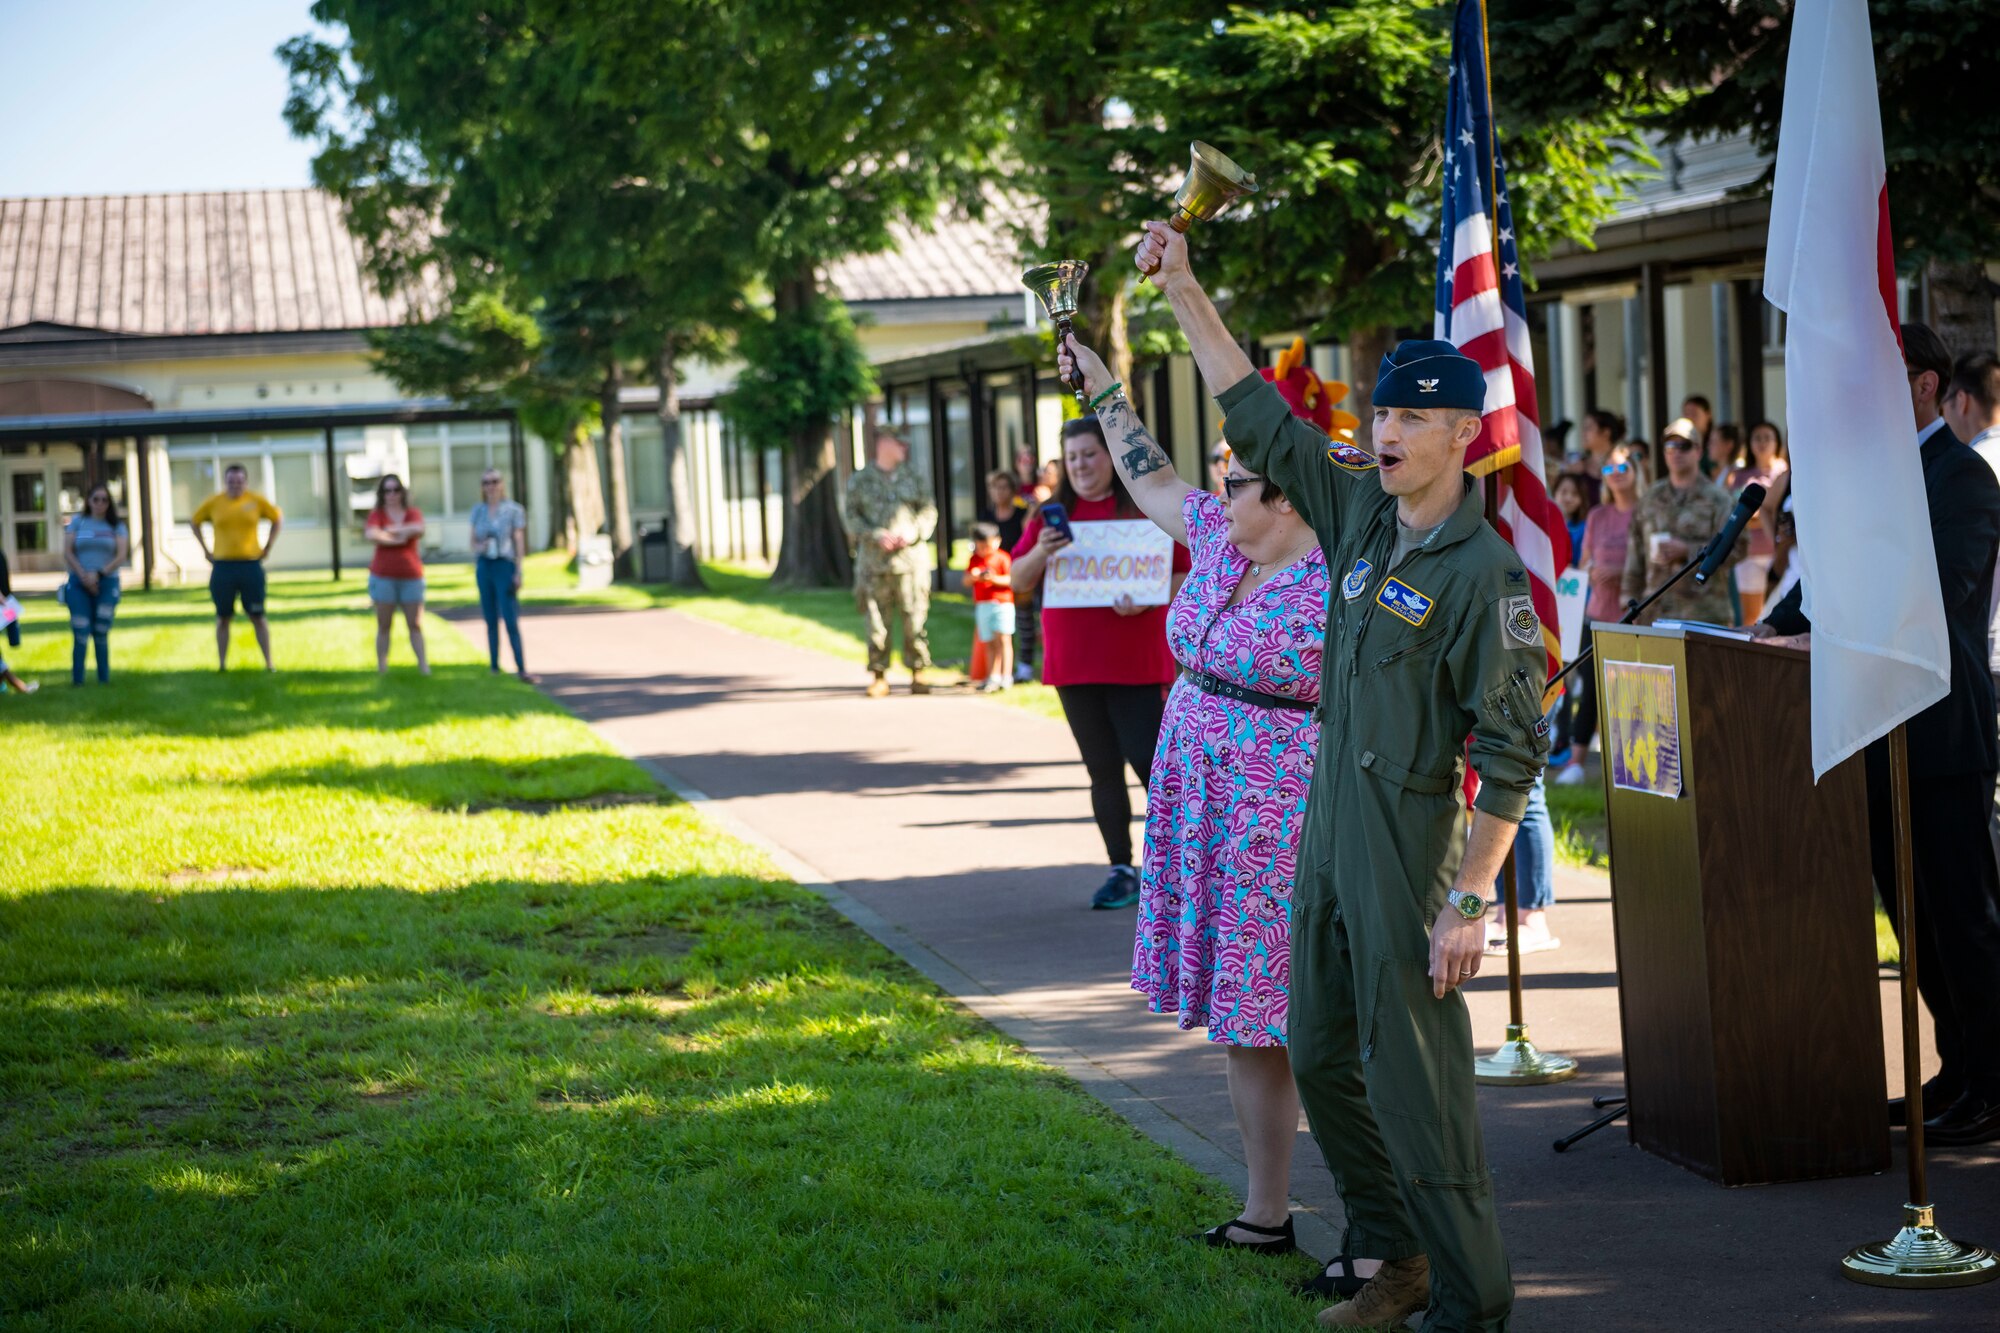 Military member in uniform and civilian both shake bells above their heads in front of a crowd